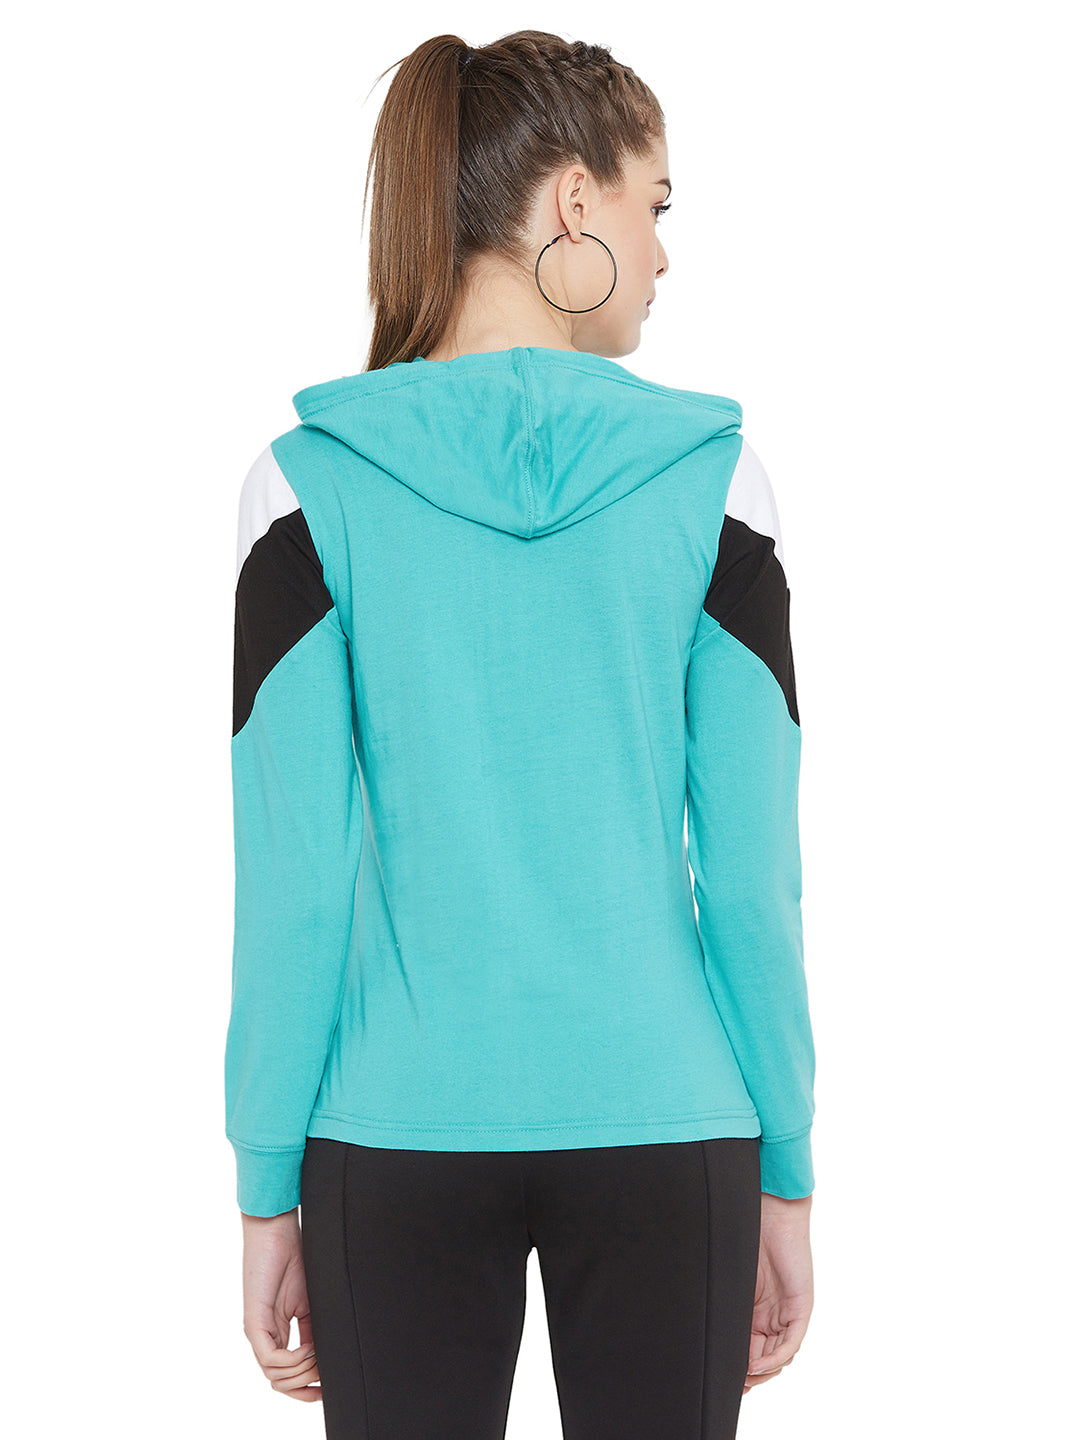 Persian Green/White/Black Full Sleeves Stylish Color Block Hooded Top